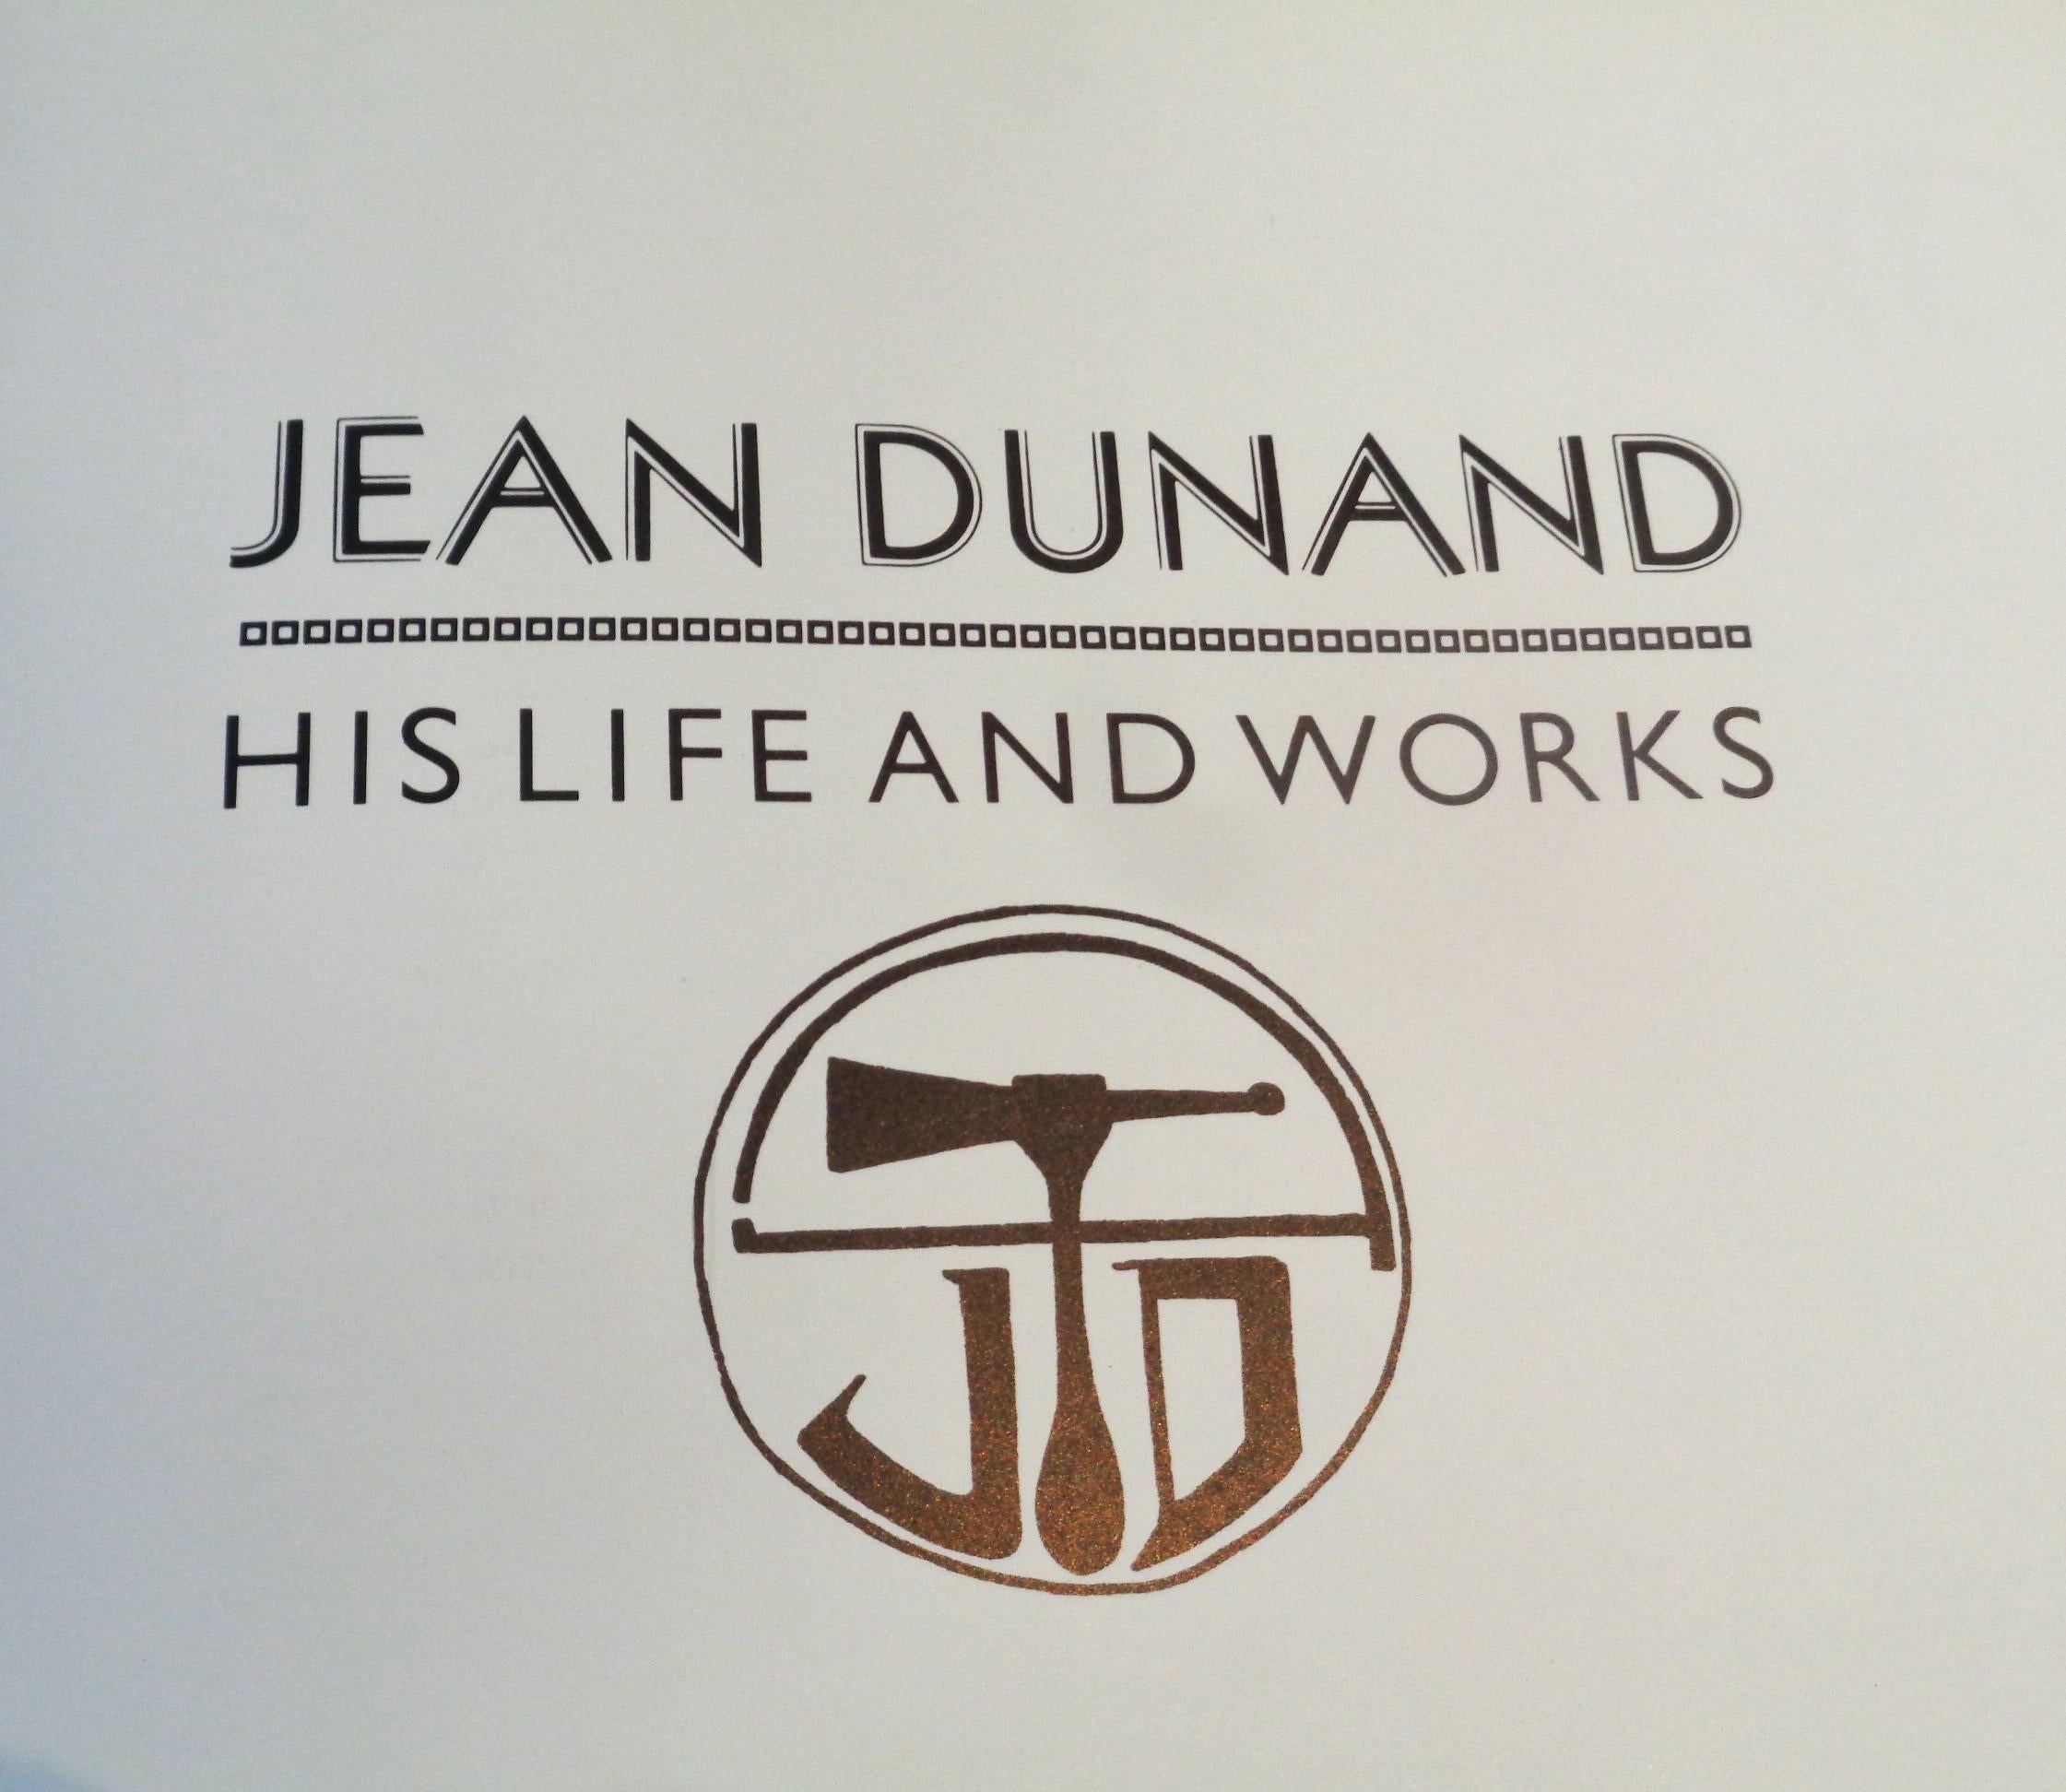 Jean Dunand - His Life and Works - Felix Marcilhac, 1991 Abrams 1